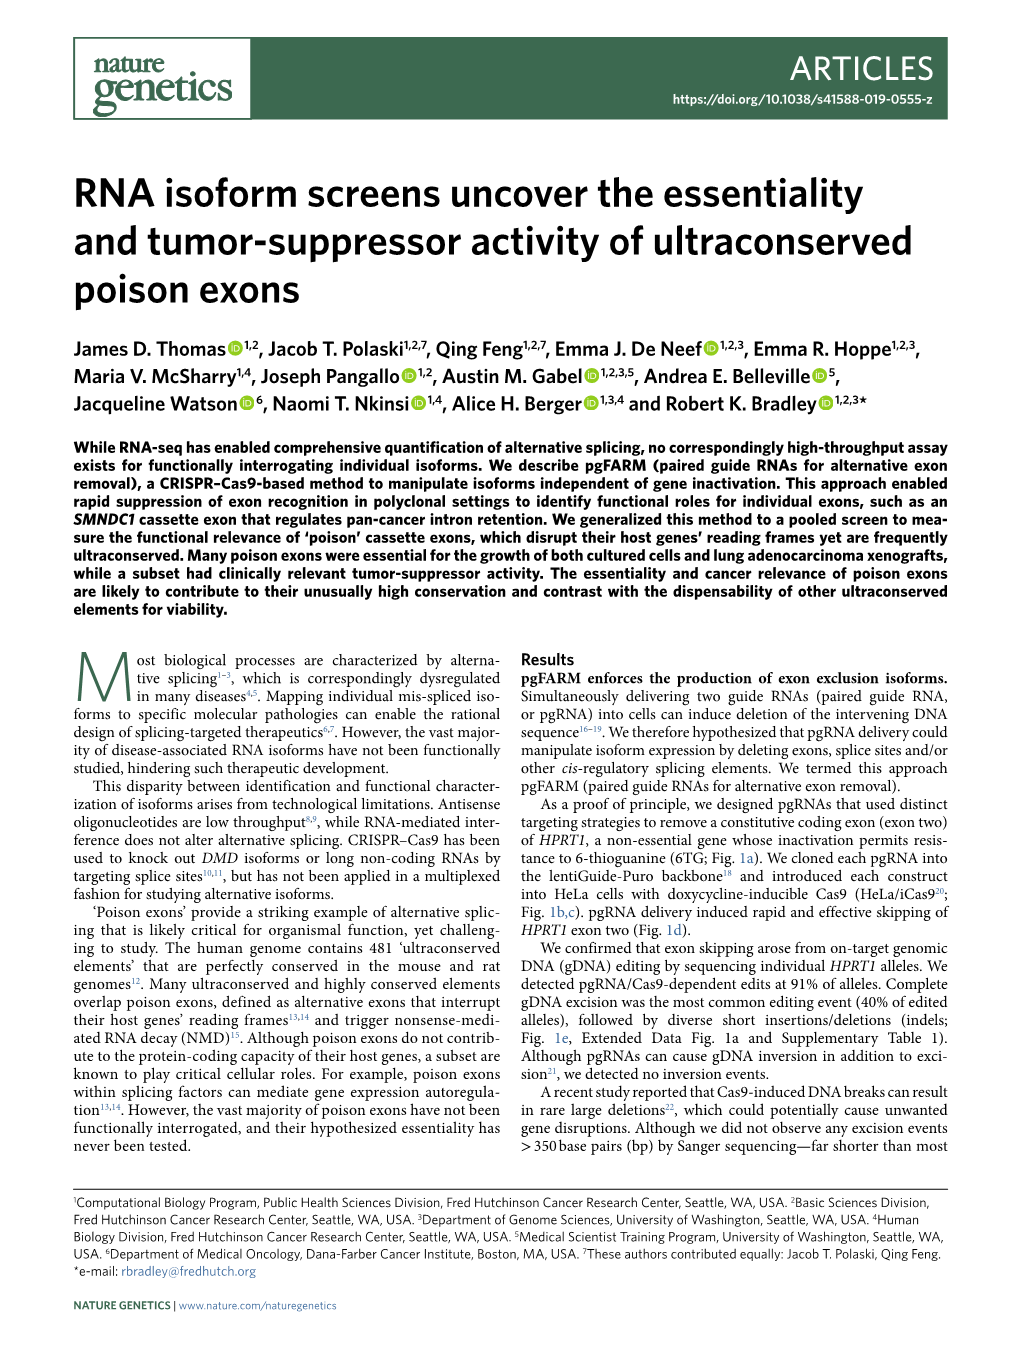 RNA Isoform Screens Uncover the Essentiality and Tumor-Suppressor Activity of Ultraconserved Poison Exons